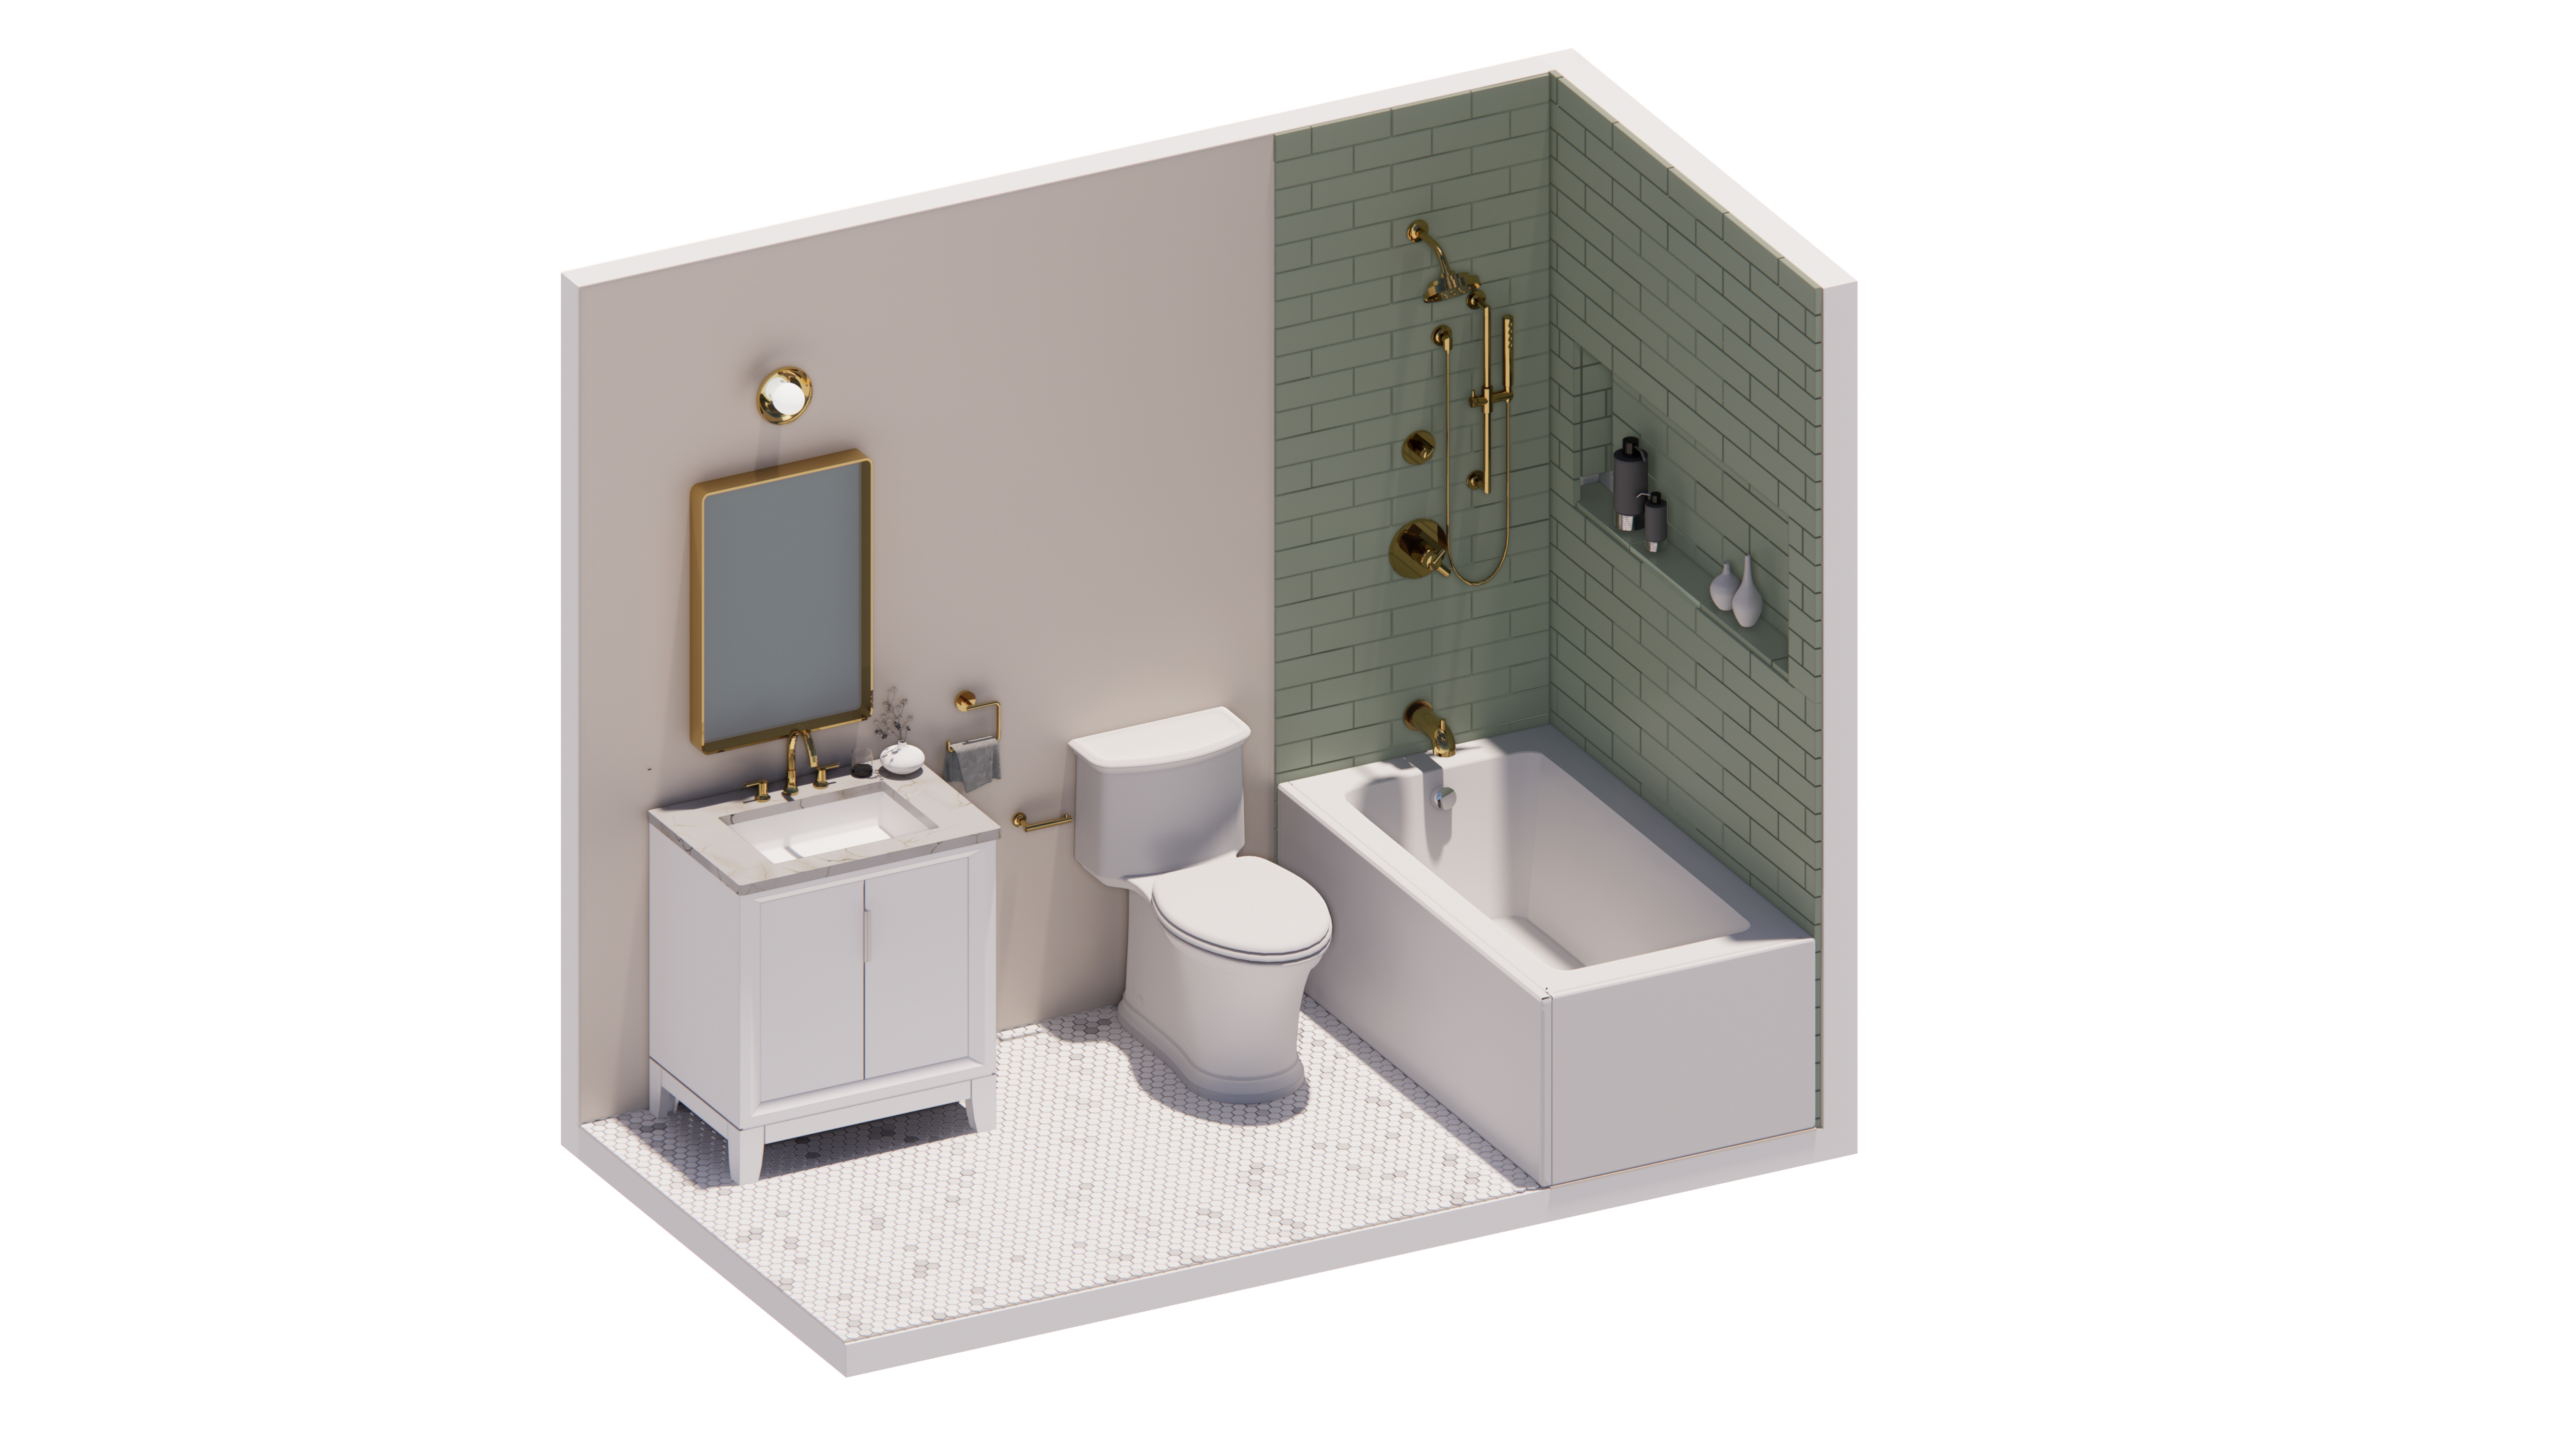 The joule NOMI Guest bathroom remodel collection